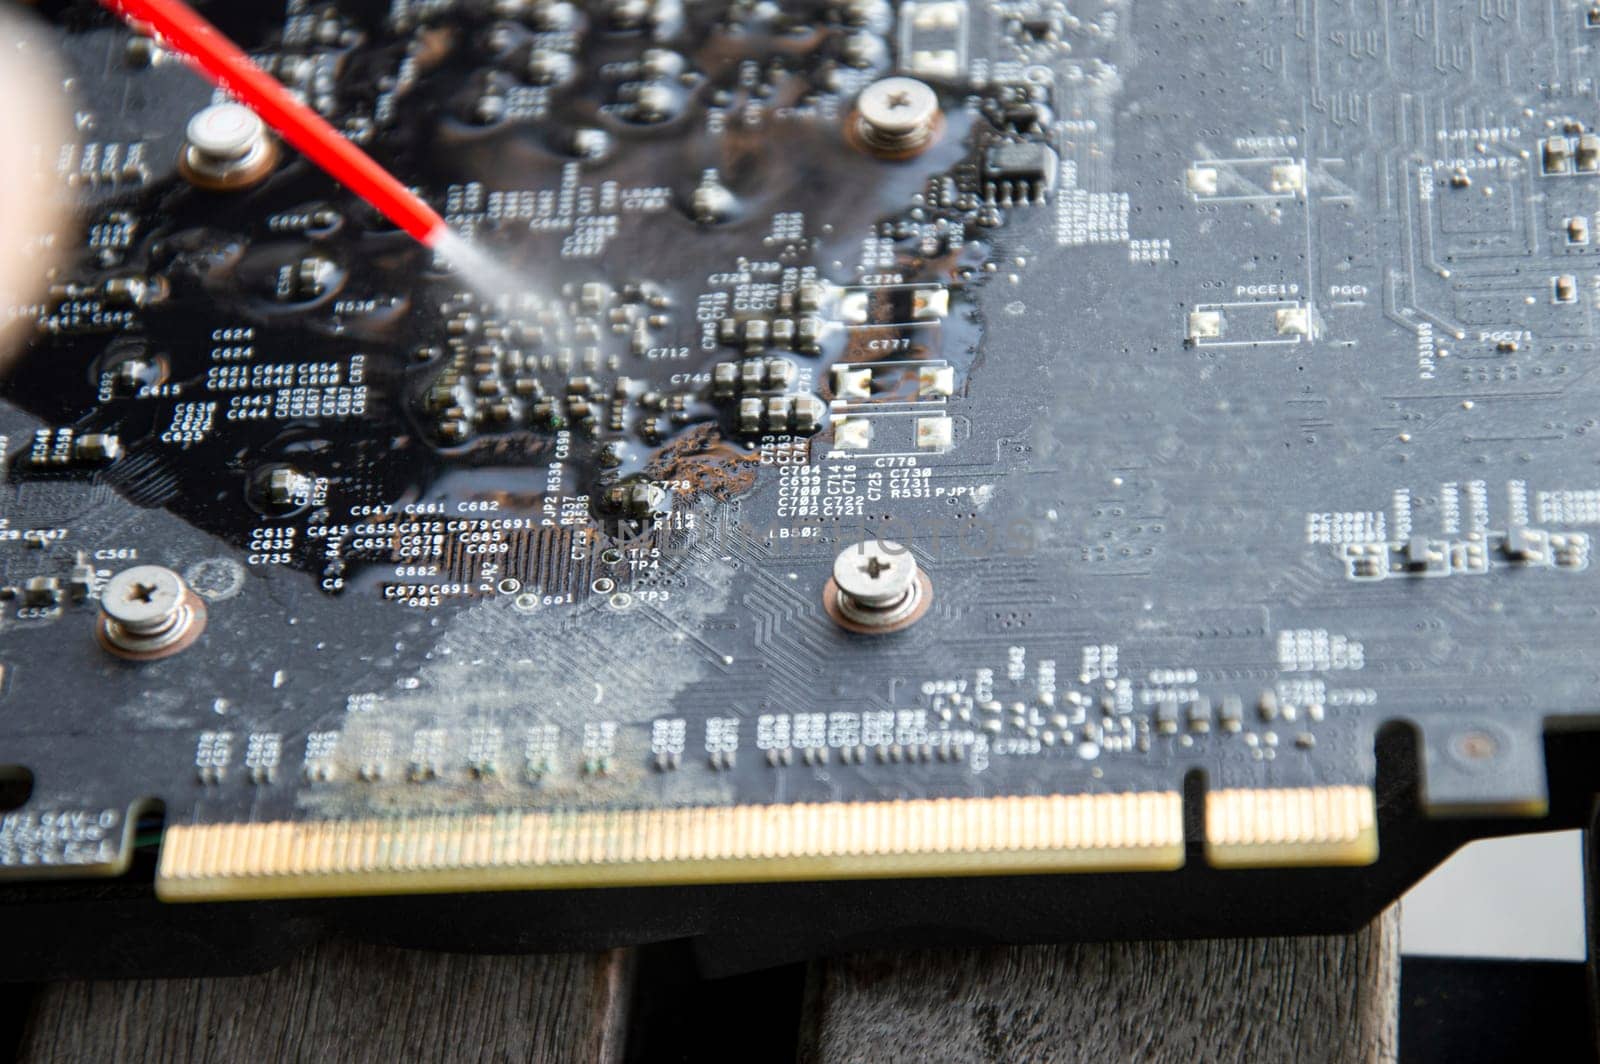 Technician view using spray to clean graphics card by boonruen